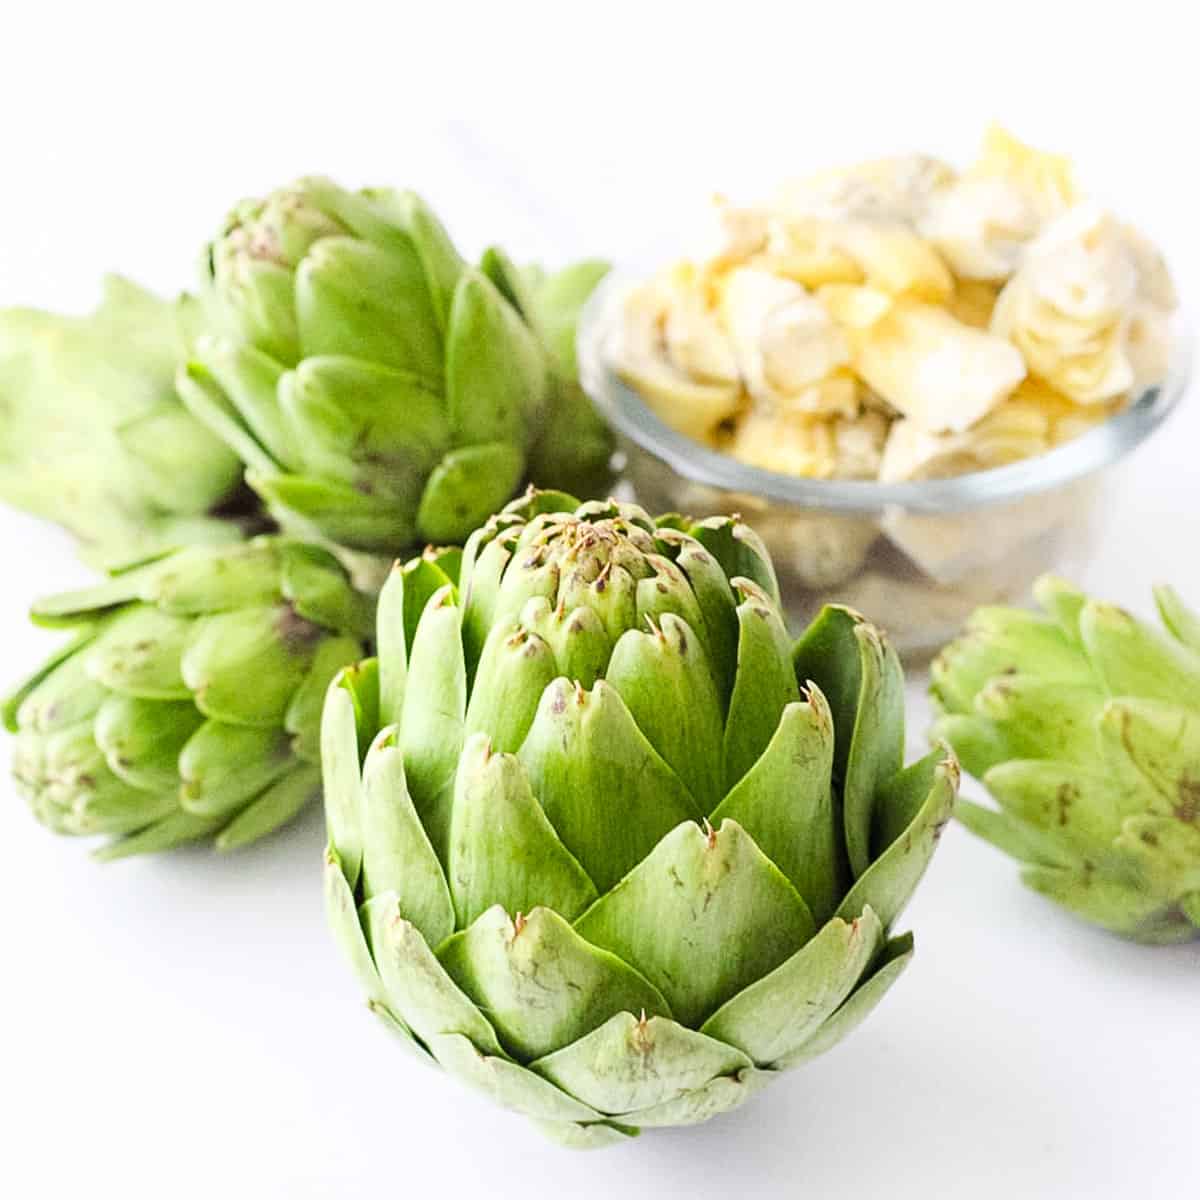 whole fresh artichokes with a bowl of canned artichokes on a marble countertop.